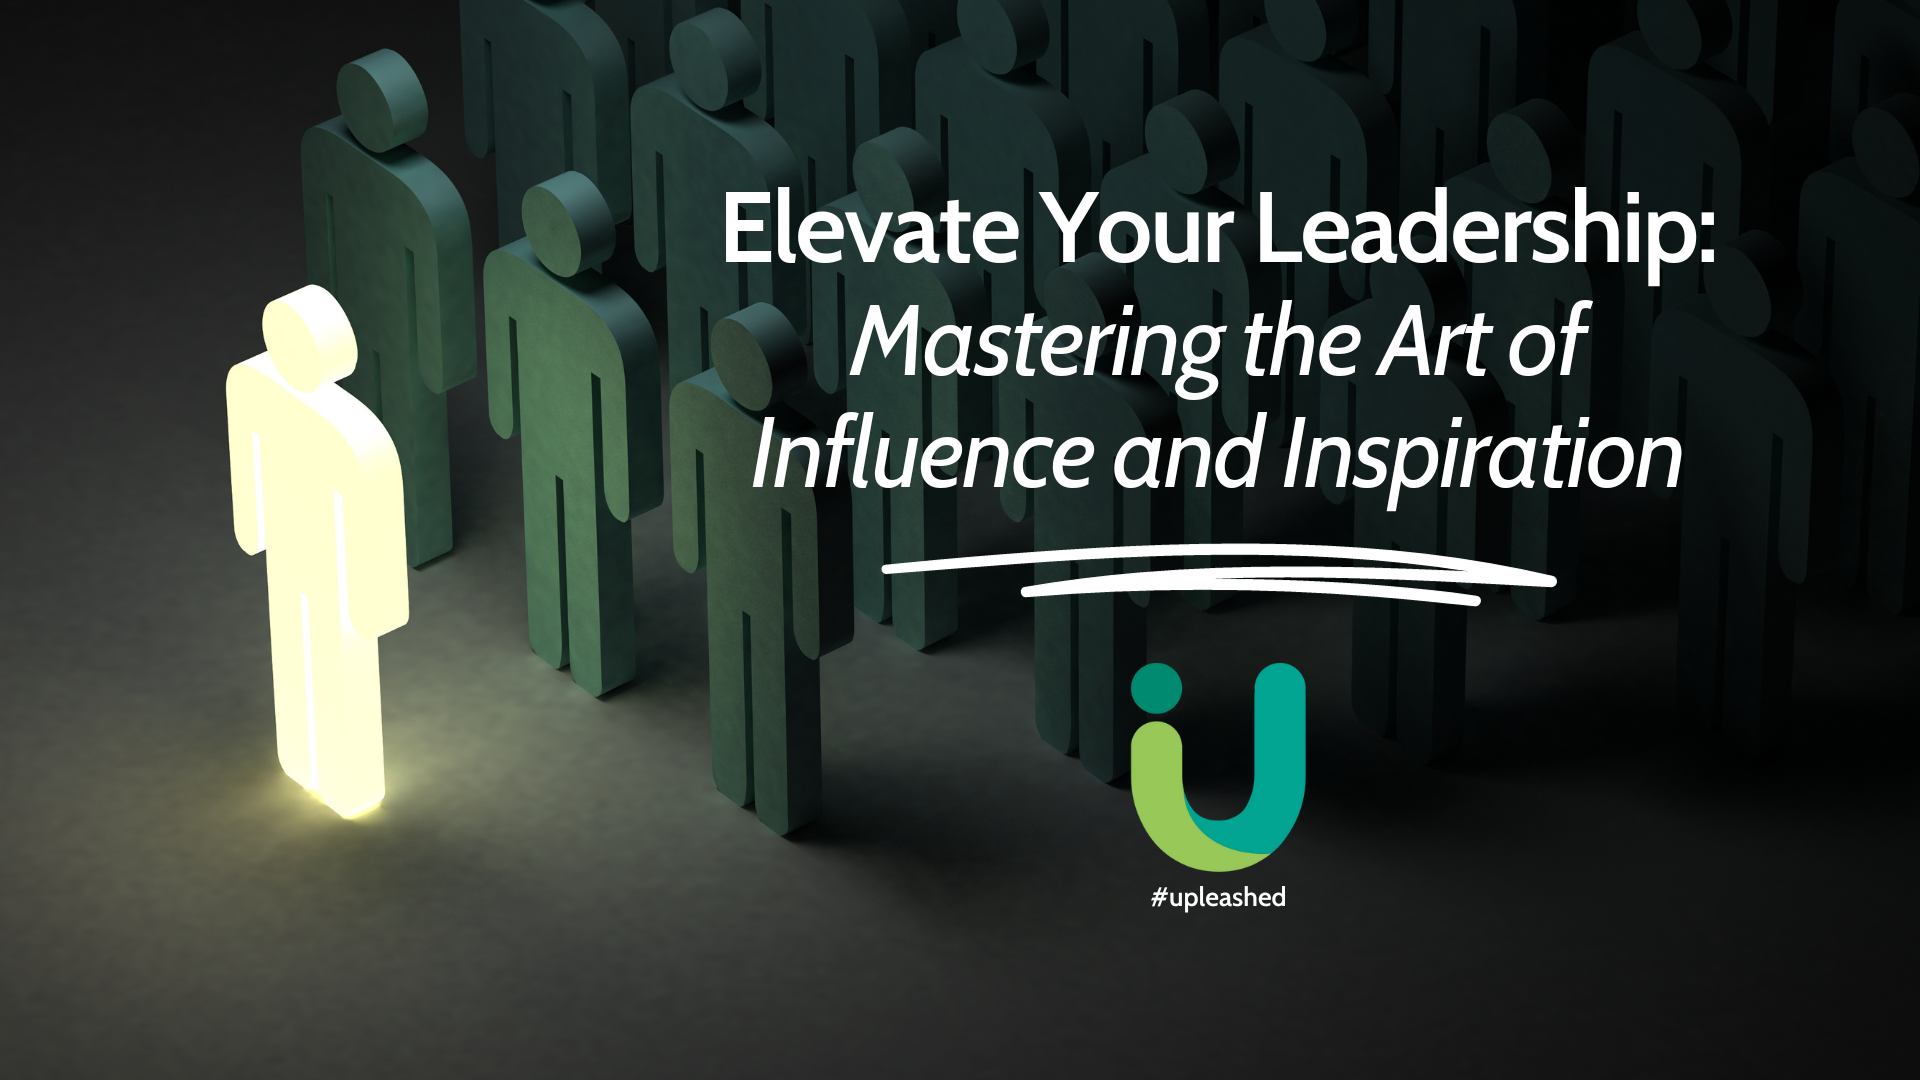 Elevate Your Leadership: Mastering the Art of Influence and Inspiration